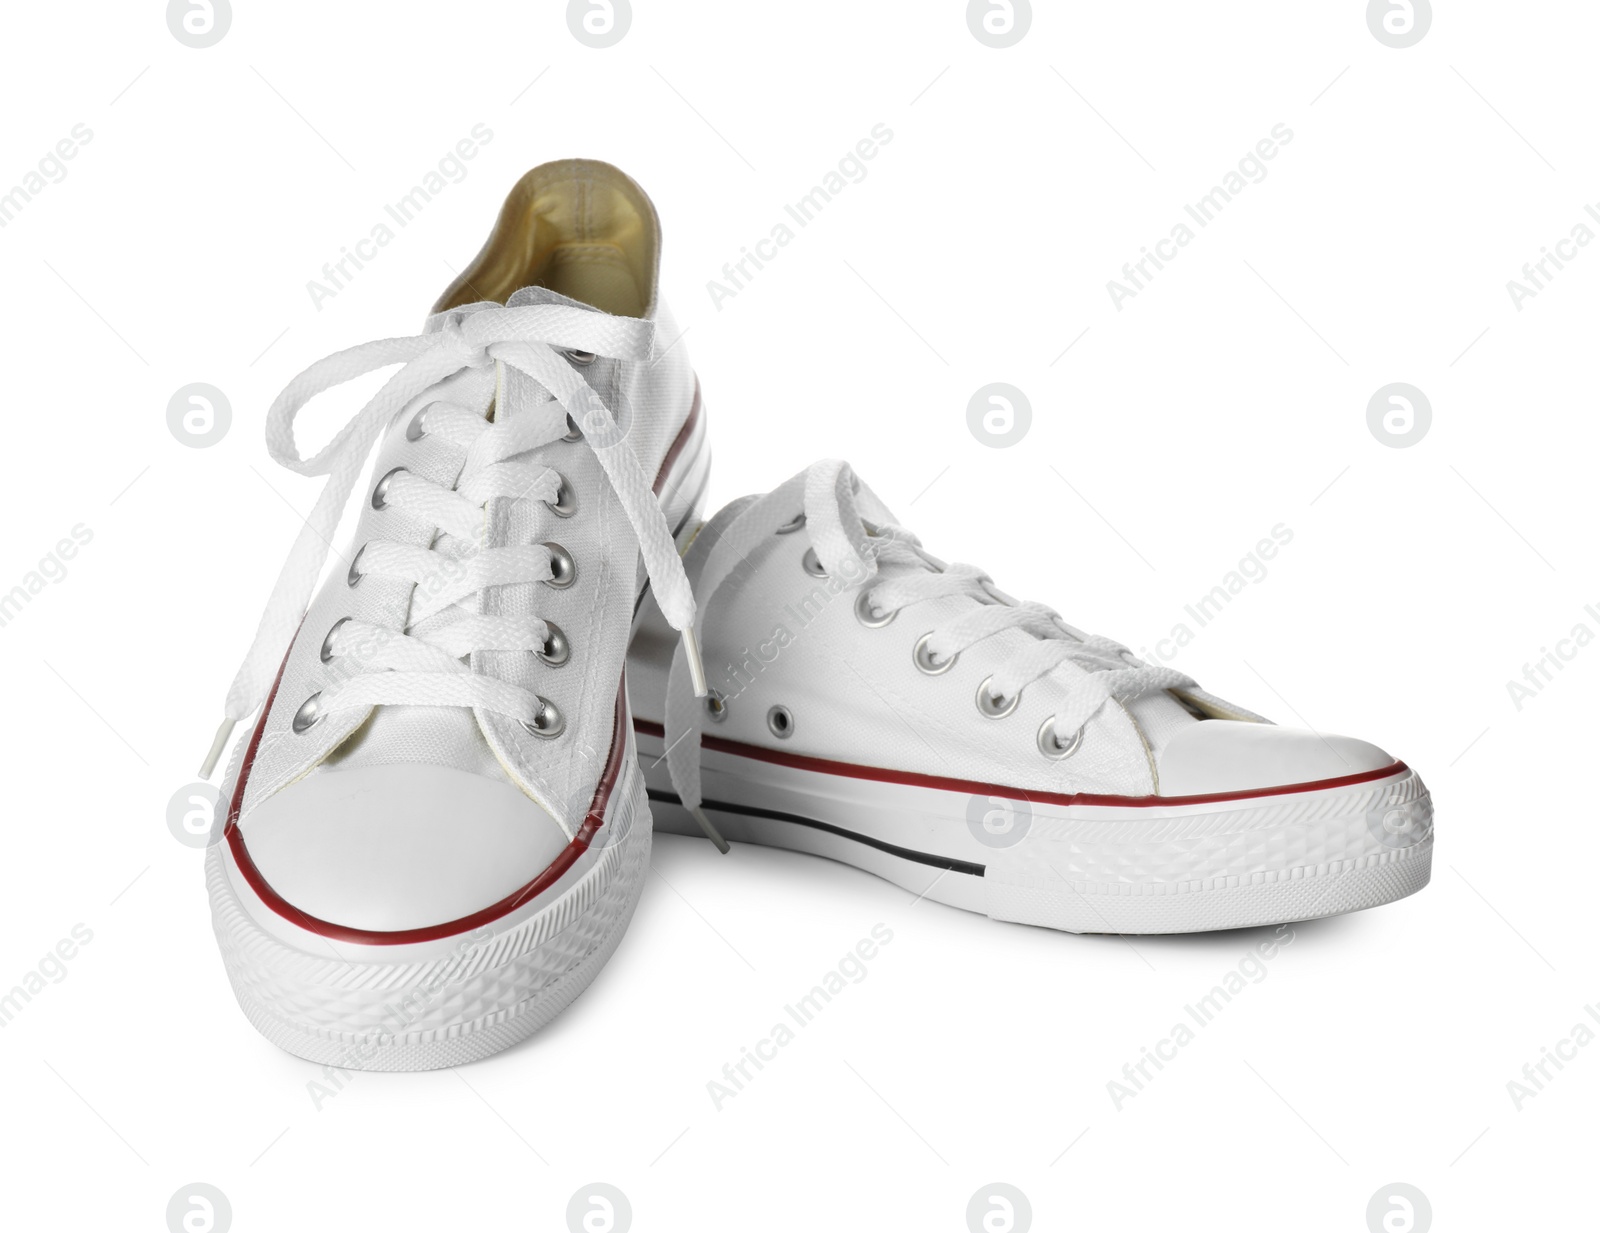 Photo of Pair of trendy sneakers isolated on white